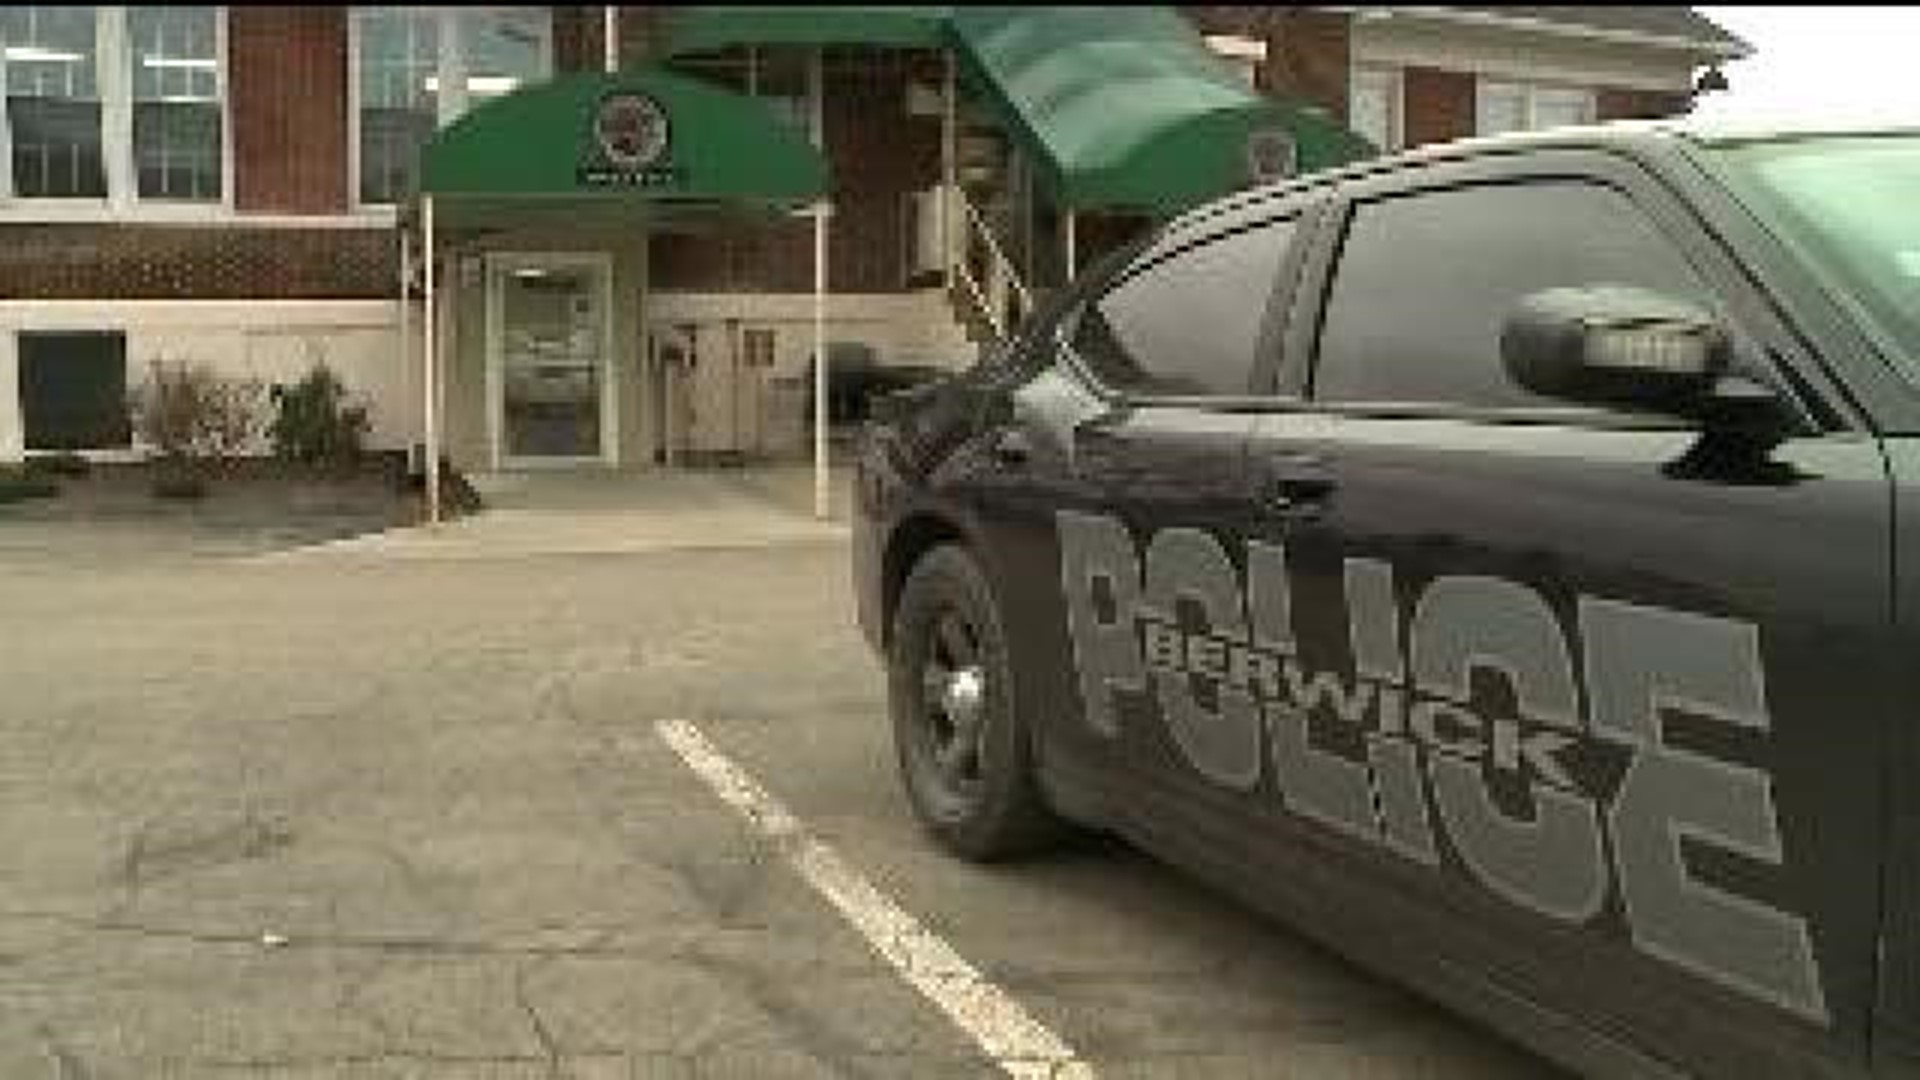 Police Respond To Apparent Hoax In Berwick